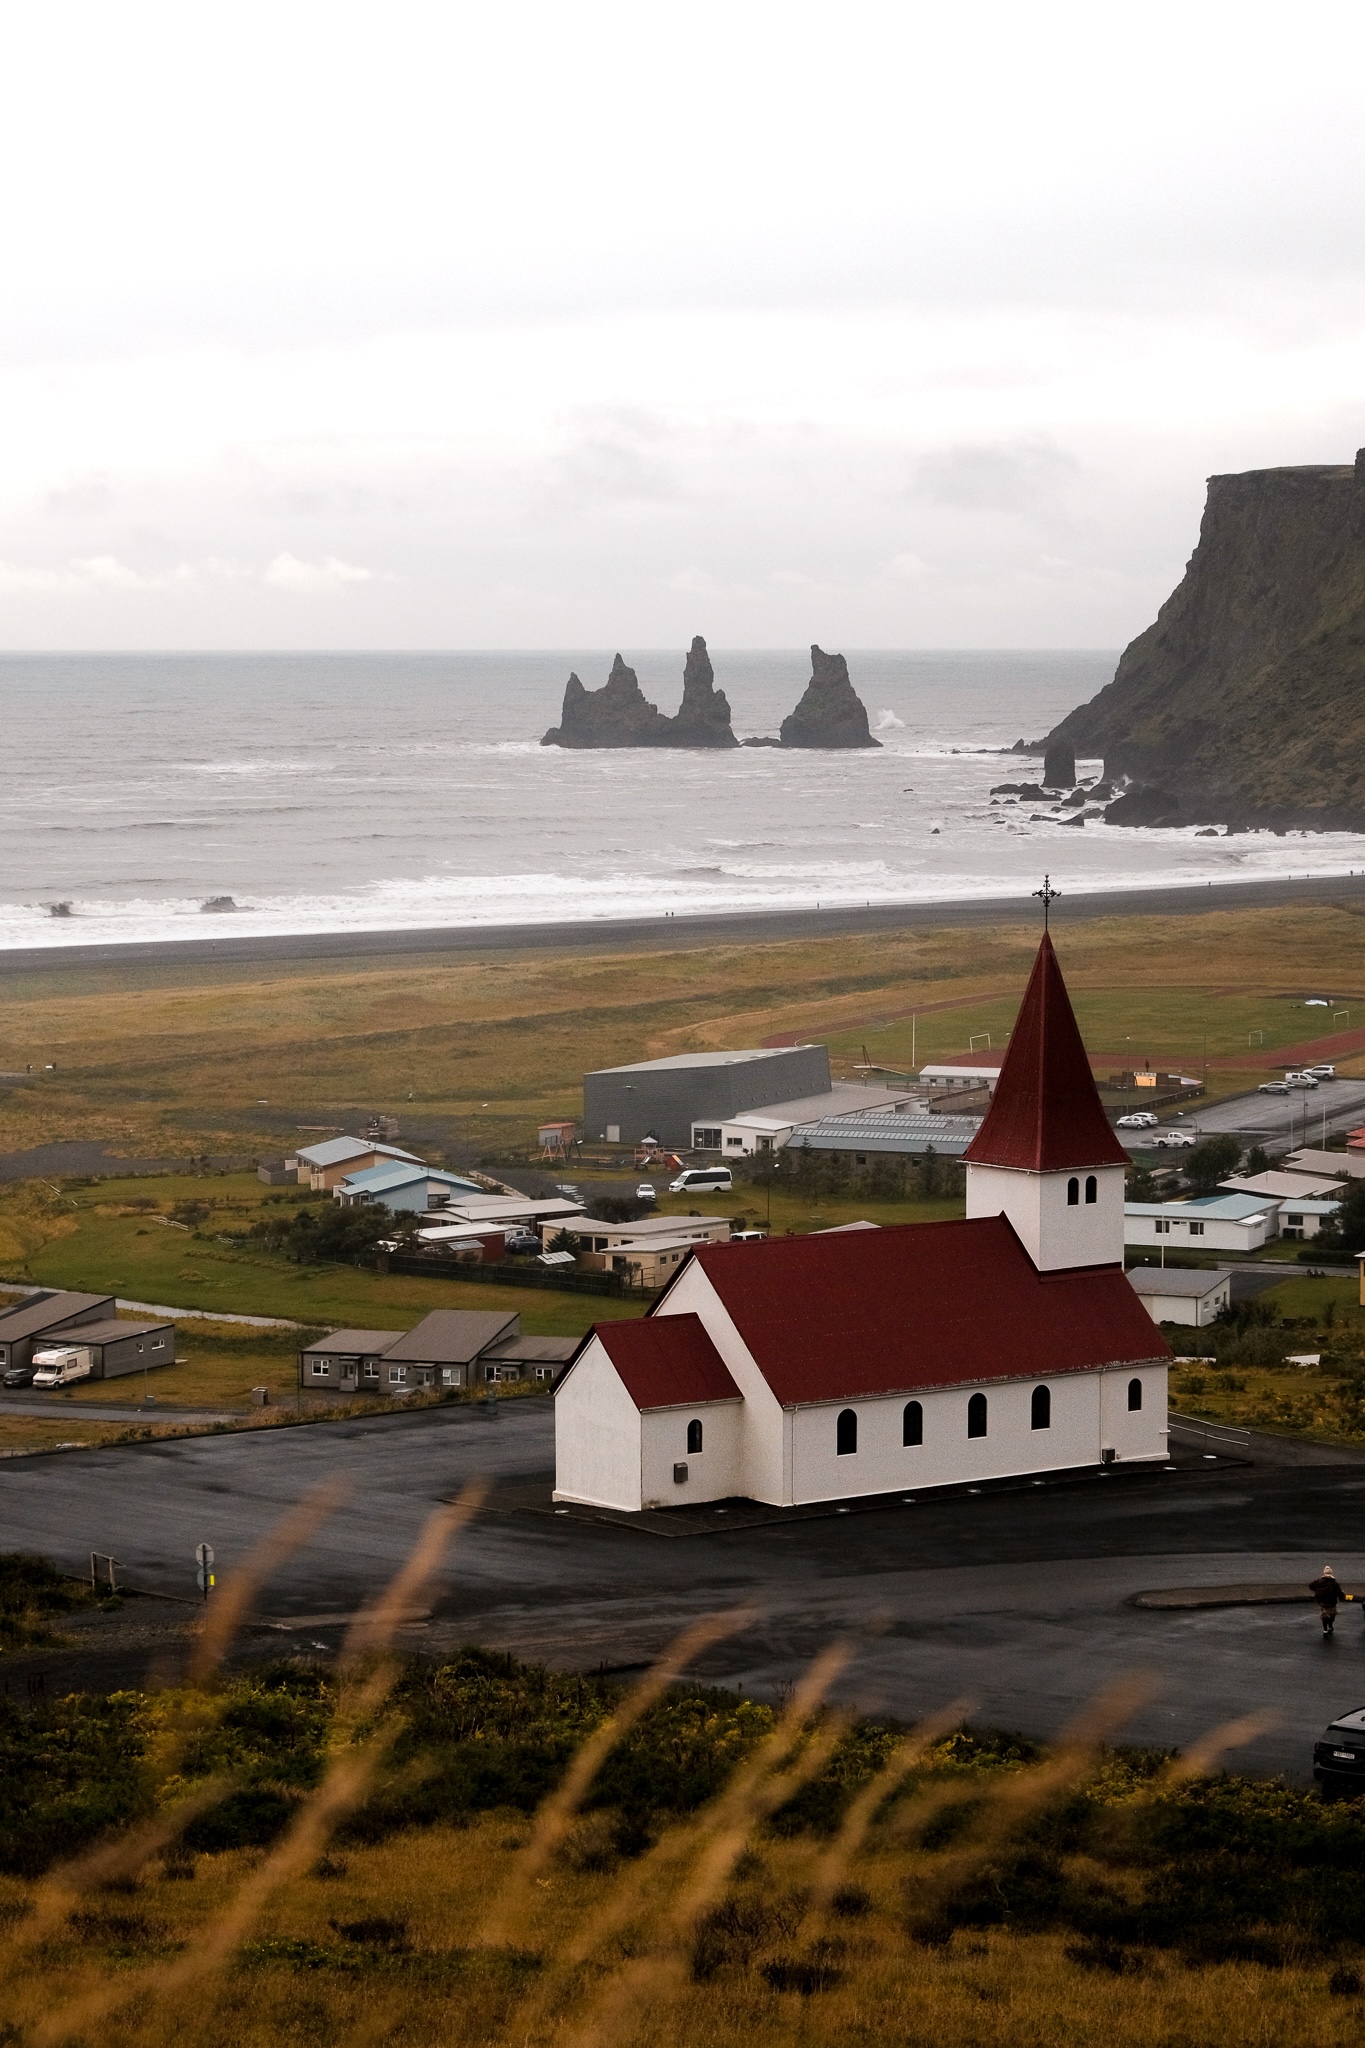 Vik from the mountain side showing off it's beautiful white church with a red roof, the black beach in the distance and yellow grass blowing in the wind in the foreground